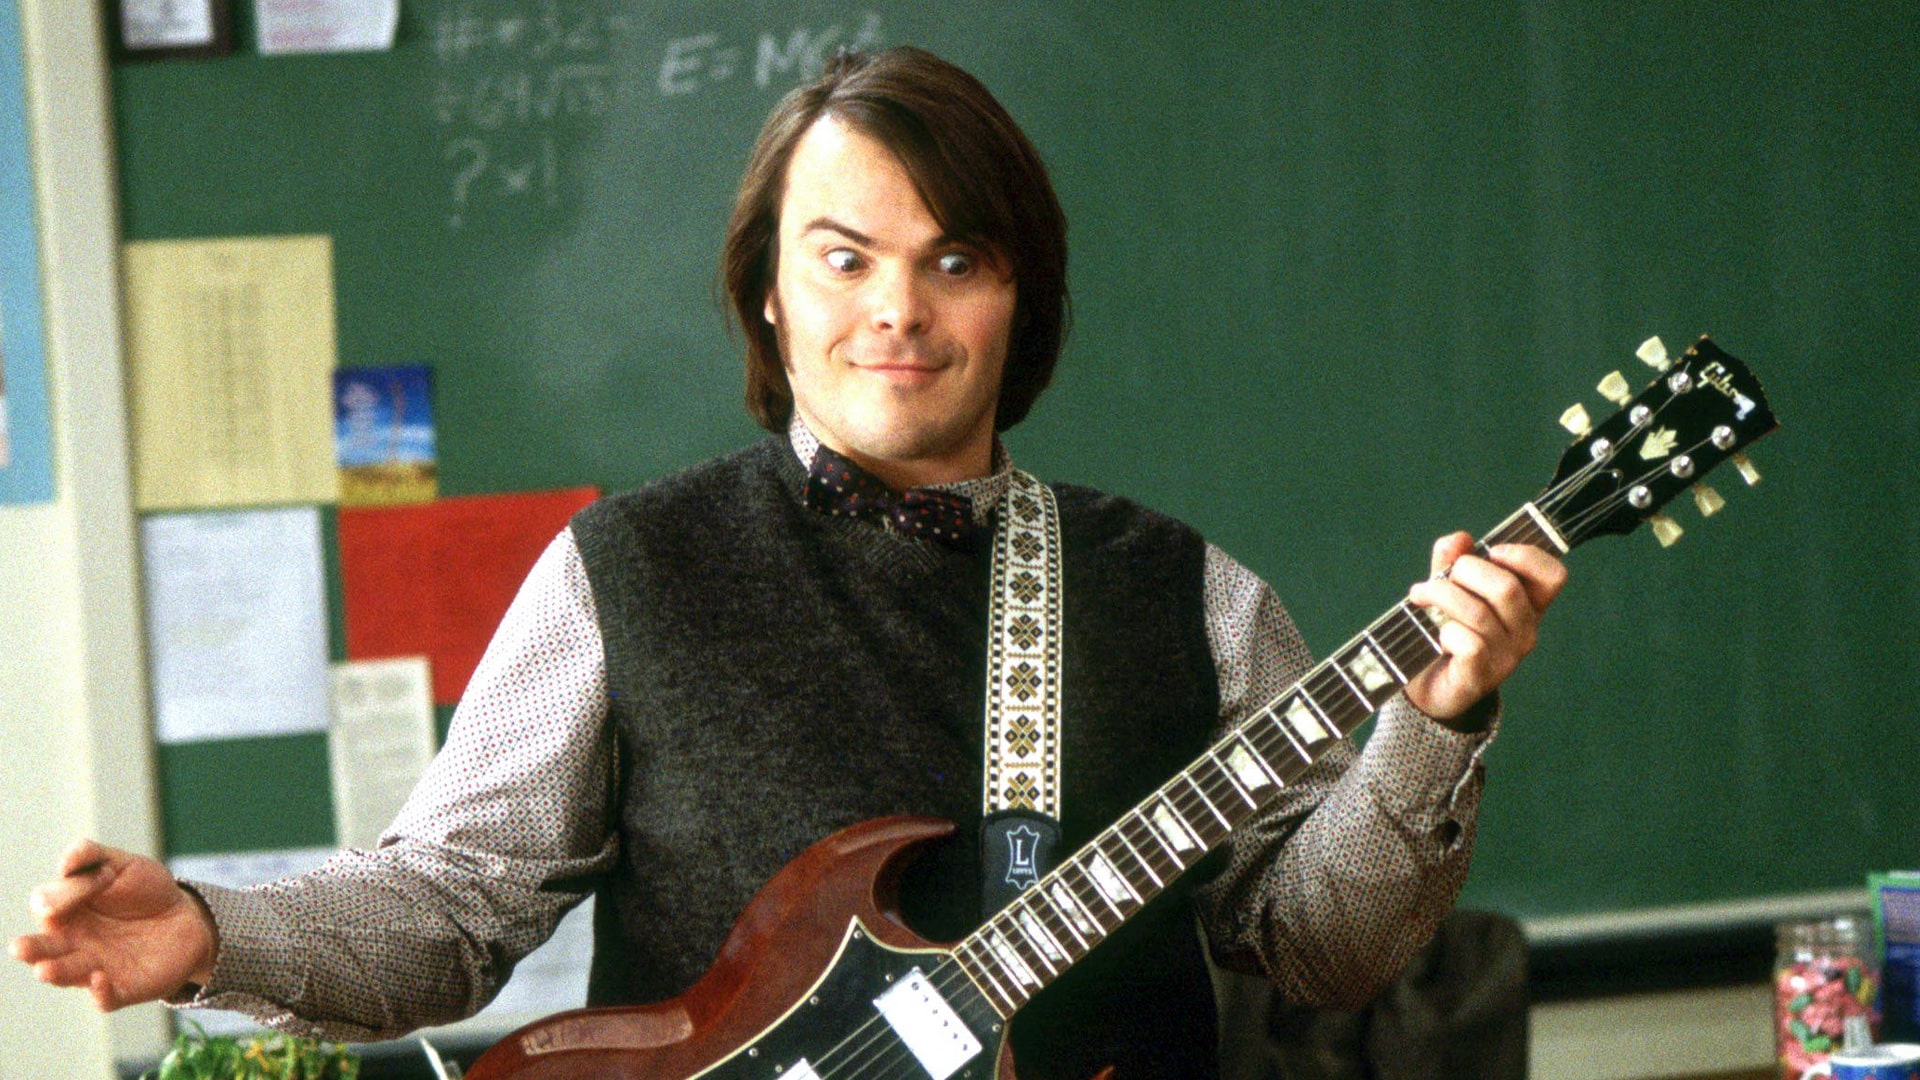 26 School Of Rock (2004) Movie Facts You Haven't Read Before - School Of Rock Movie